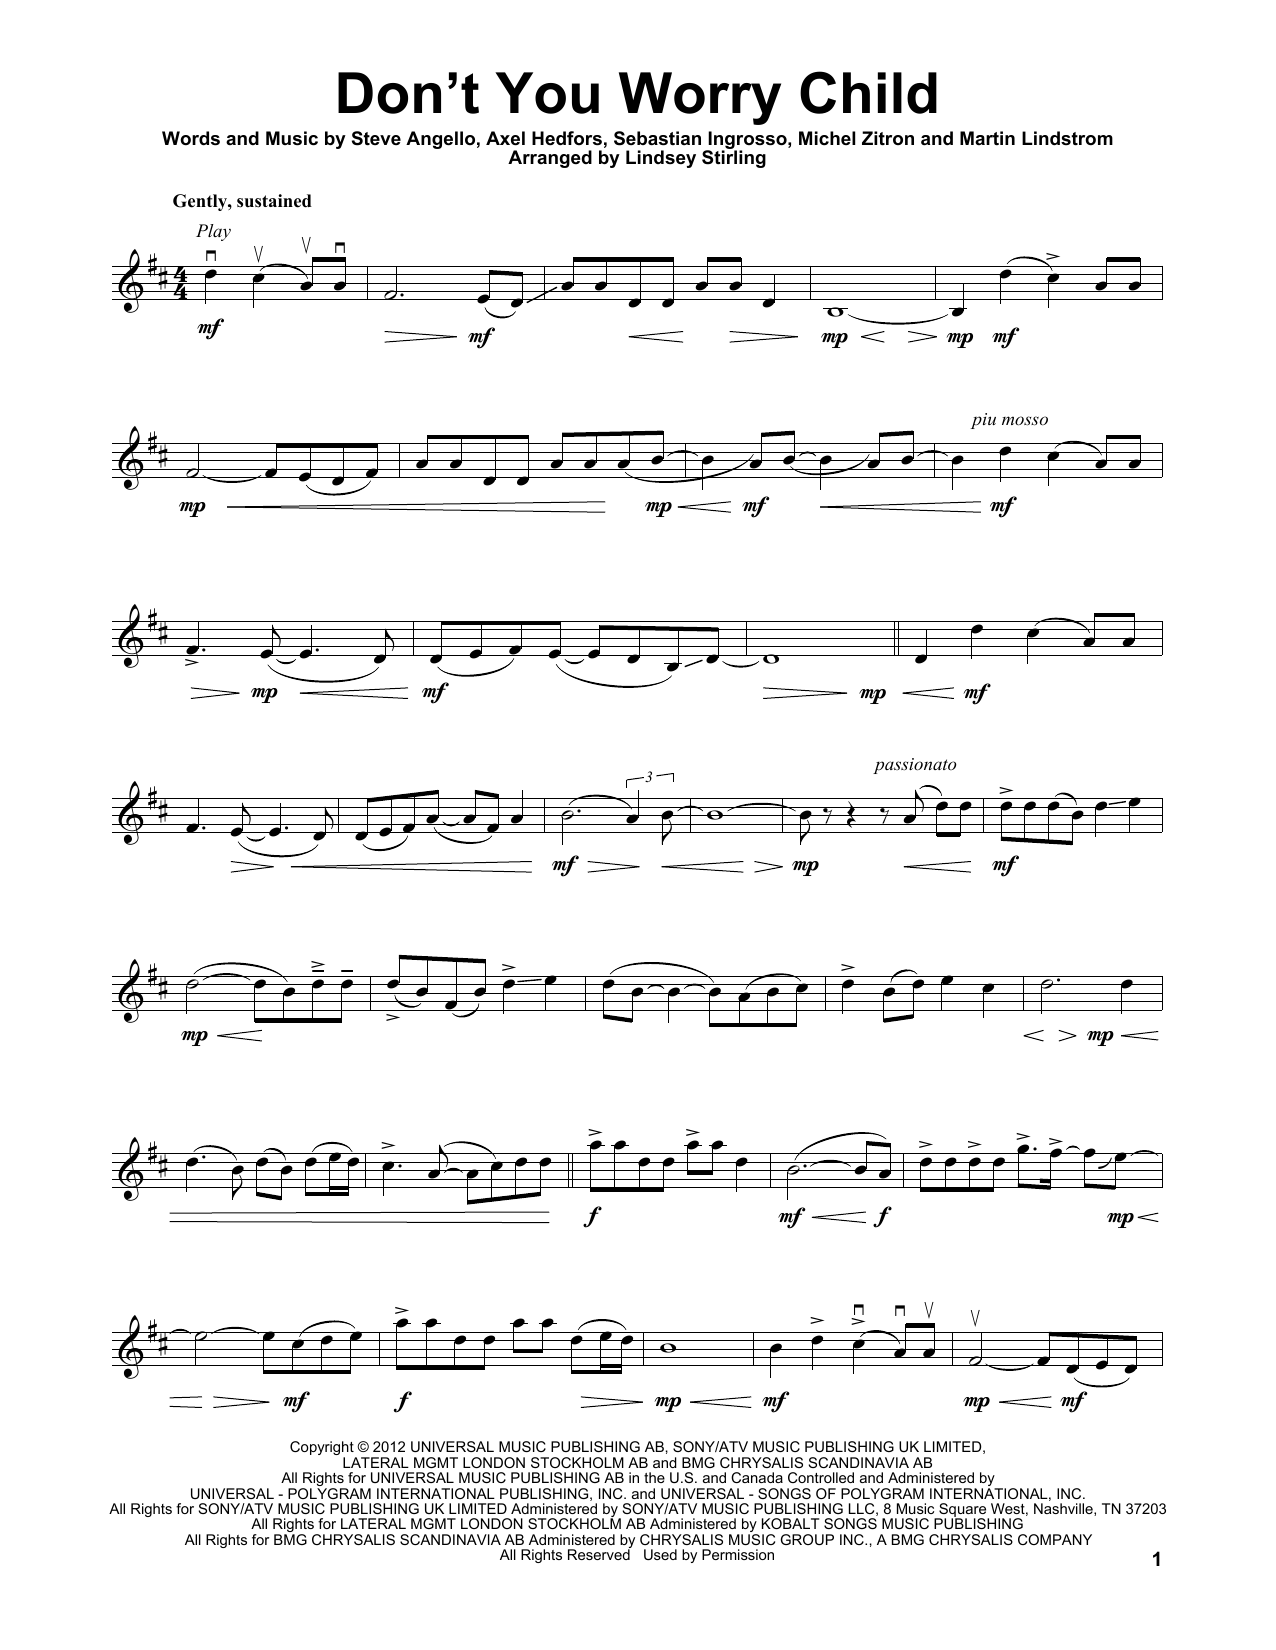 Download Lindsey Stirling Don't You Worry Child Sheet Music